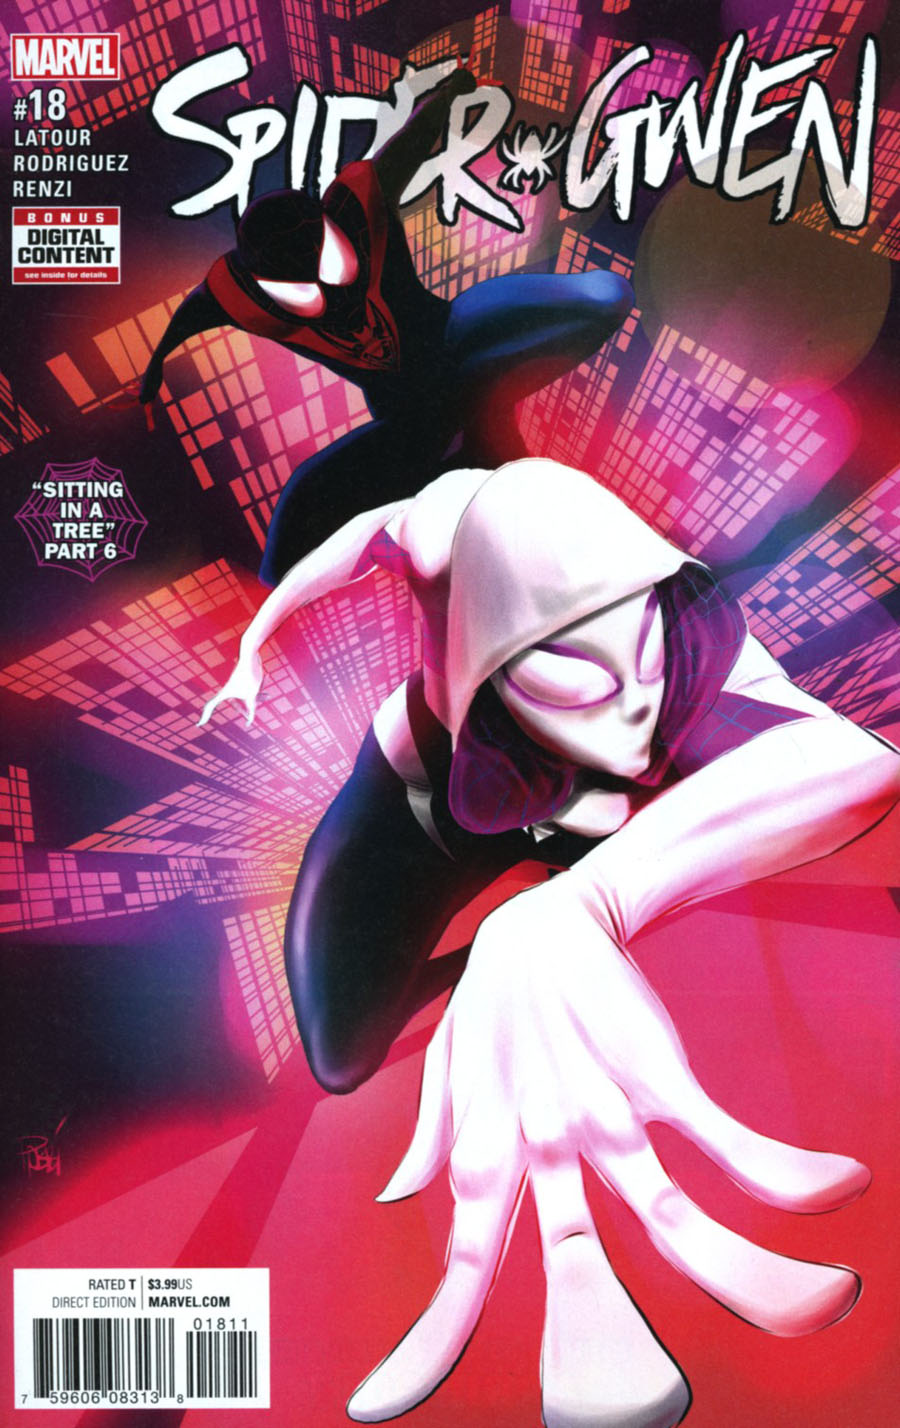 Spider-Gwen Vol 2 #18 Cover A Regular Robbi Rodriguez Cover (Sitting In A Tree Part 6)